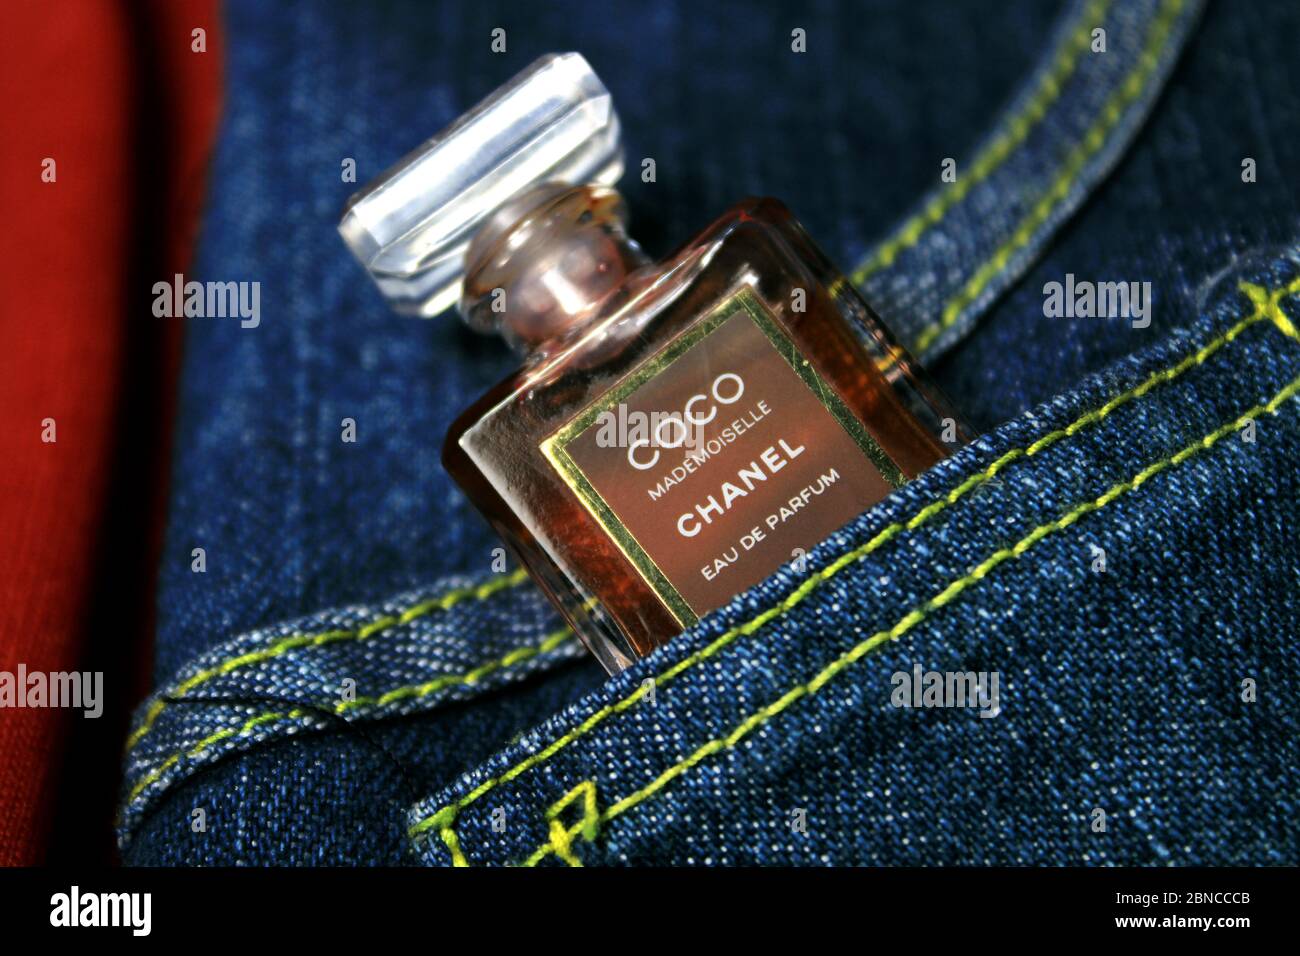 Paris, France on 13th May in 2020 : Chanel perfume bottles in a pocket of  blue jeans. French perfume Stock Photo - Alamy